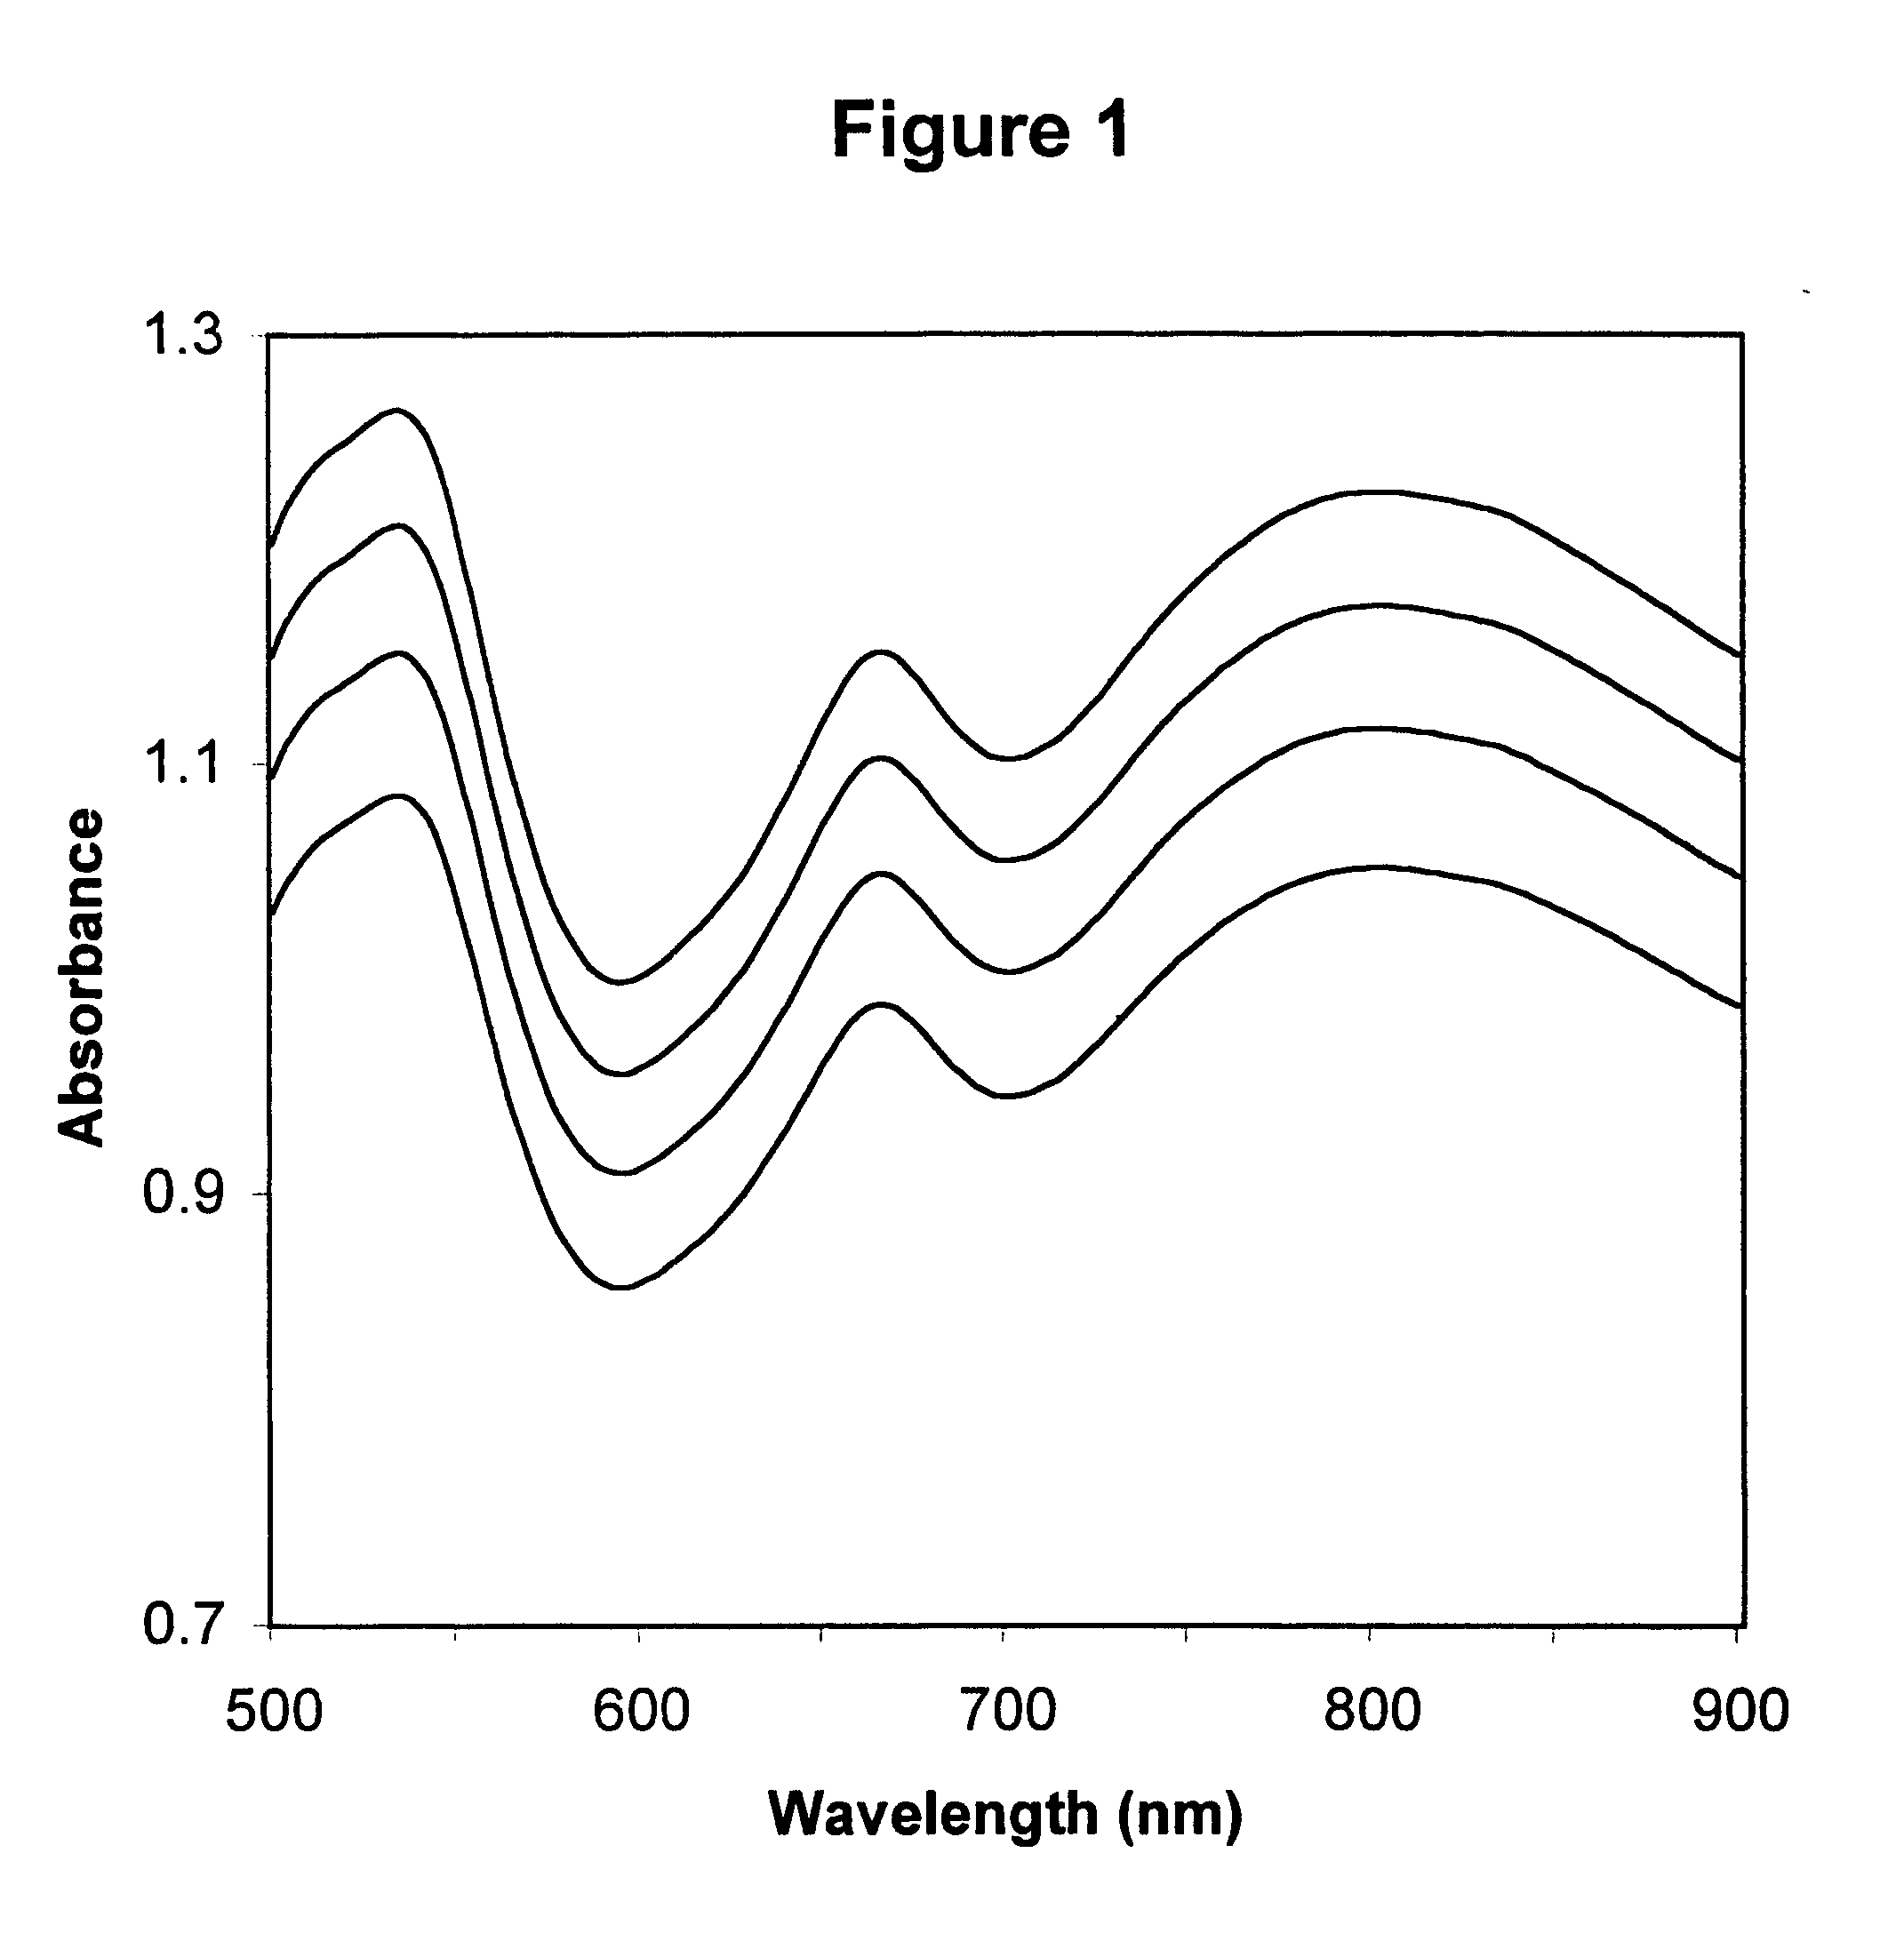 Method for calibrating spectrophotometric apparatus with synthetic fluids to measure plasma and serum analytes